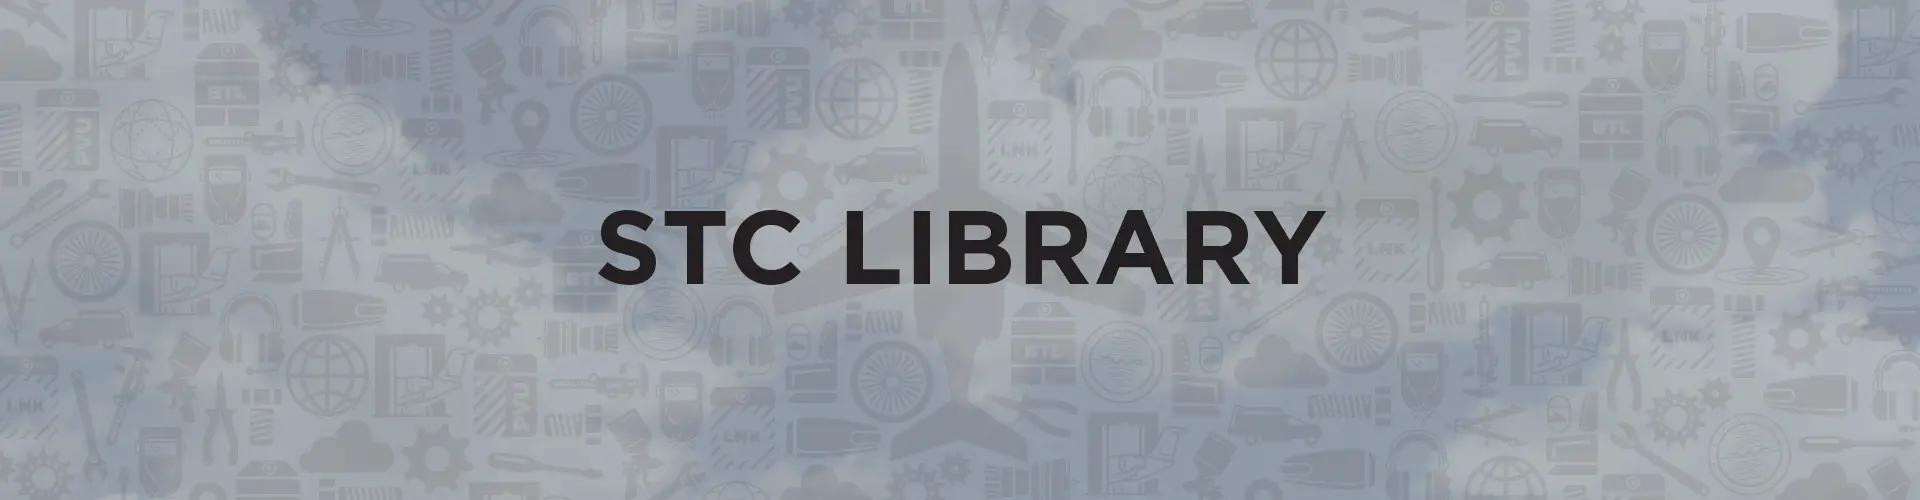 Resources_header-stc_library.jpg